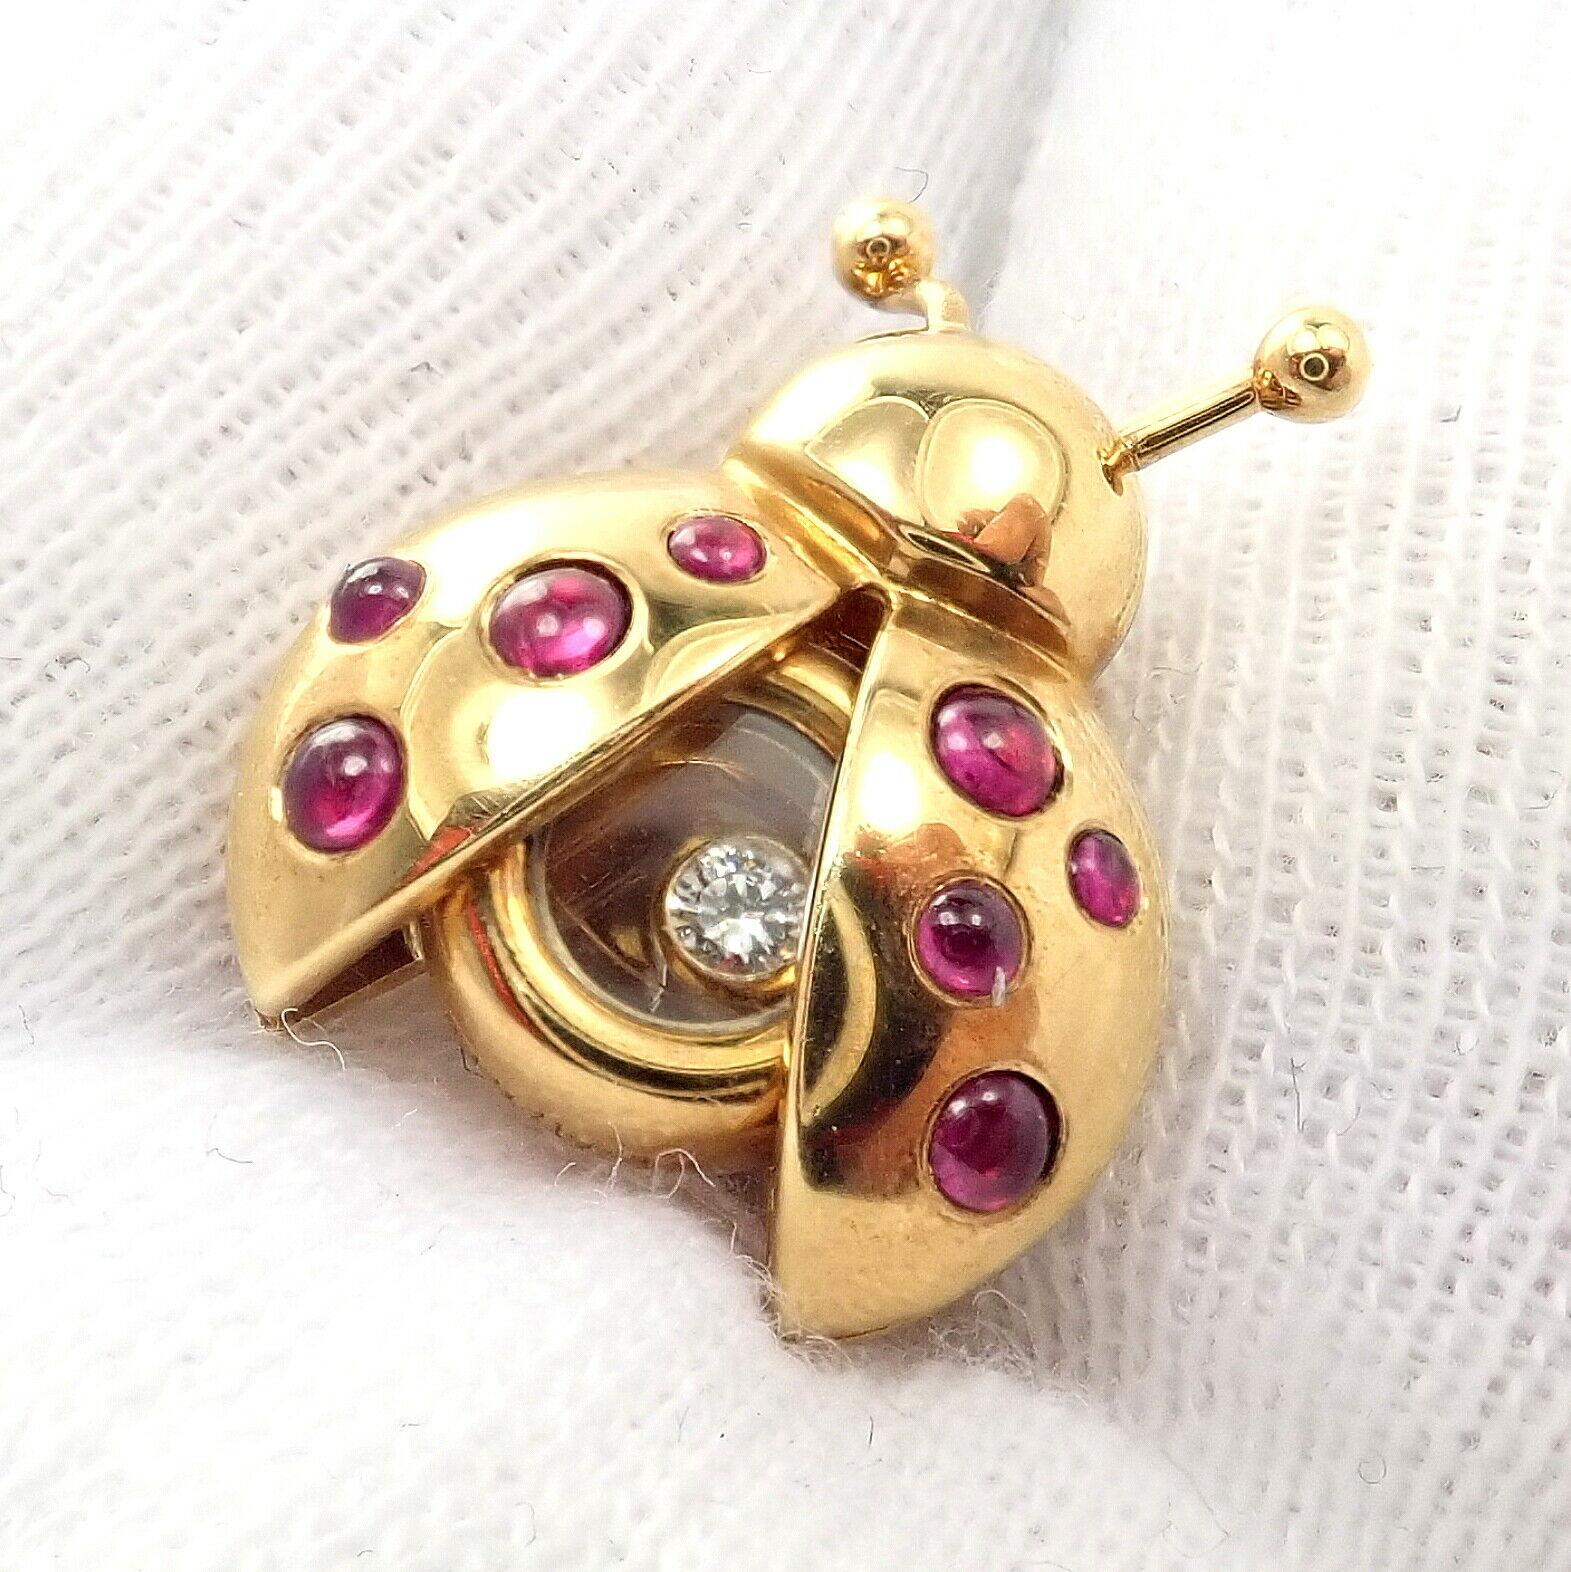 Women's or Men's Vintage Chopard Happy Lady Bug Ruby Diamond Yellow Gold Brooch Pin Tie Tack